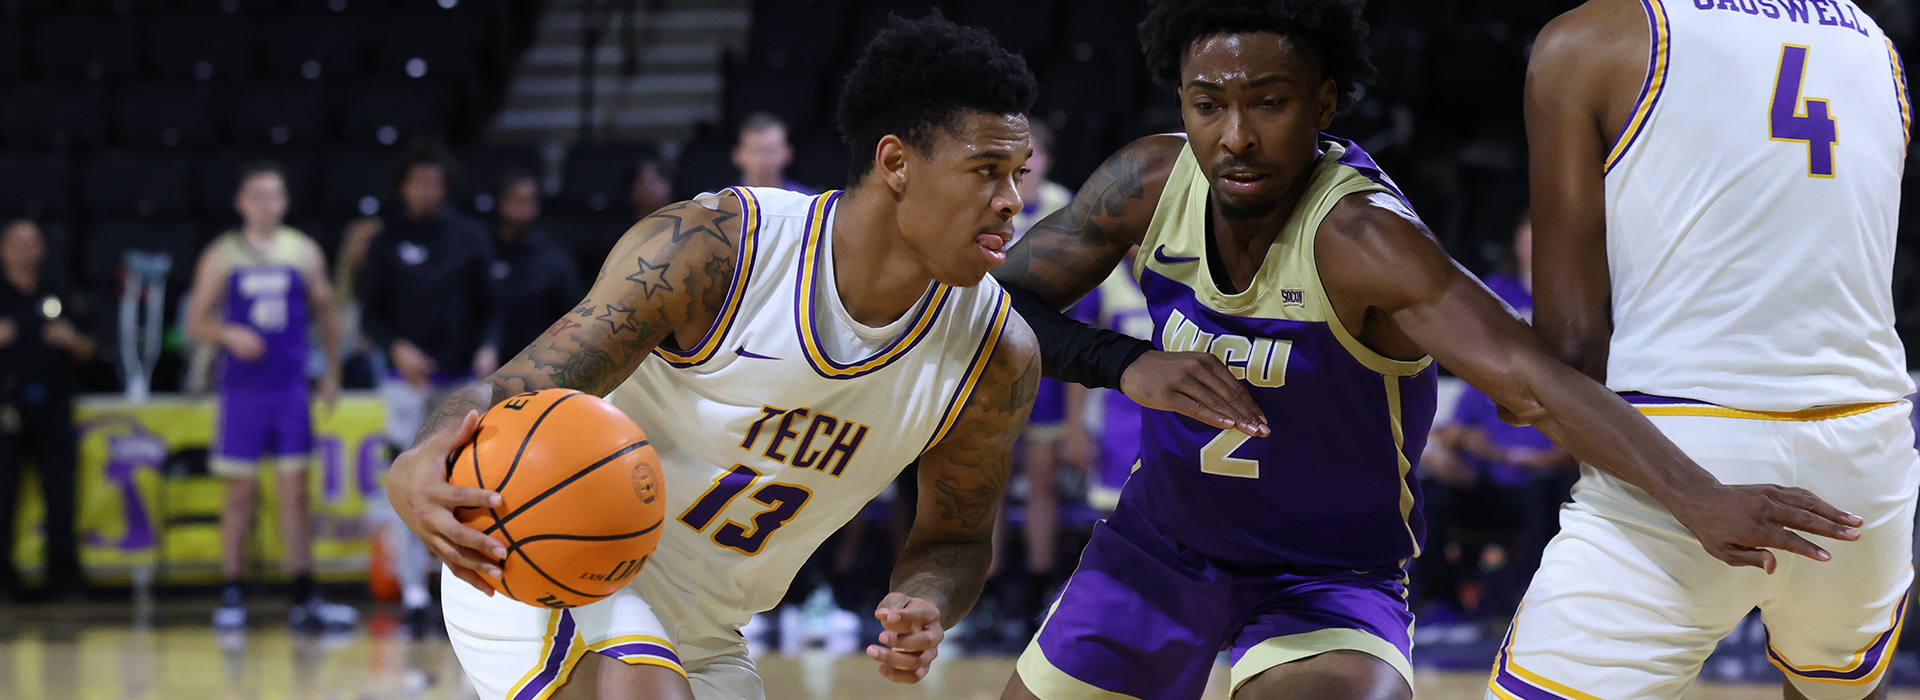 Late run leads Catamounts past Golden Eagles